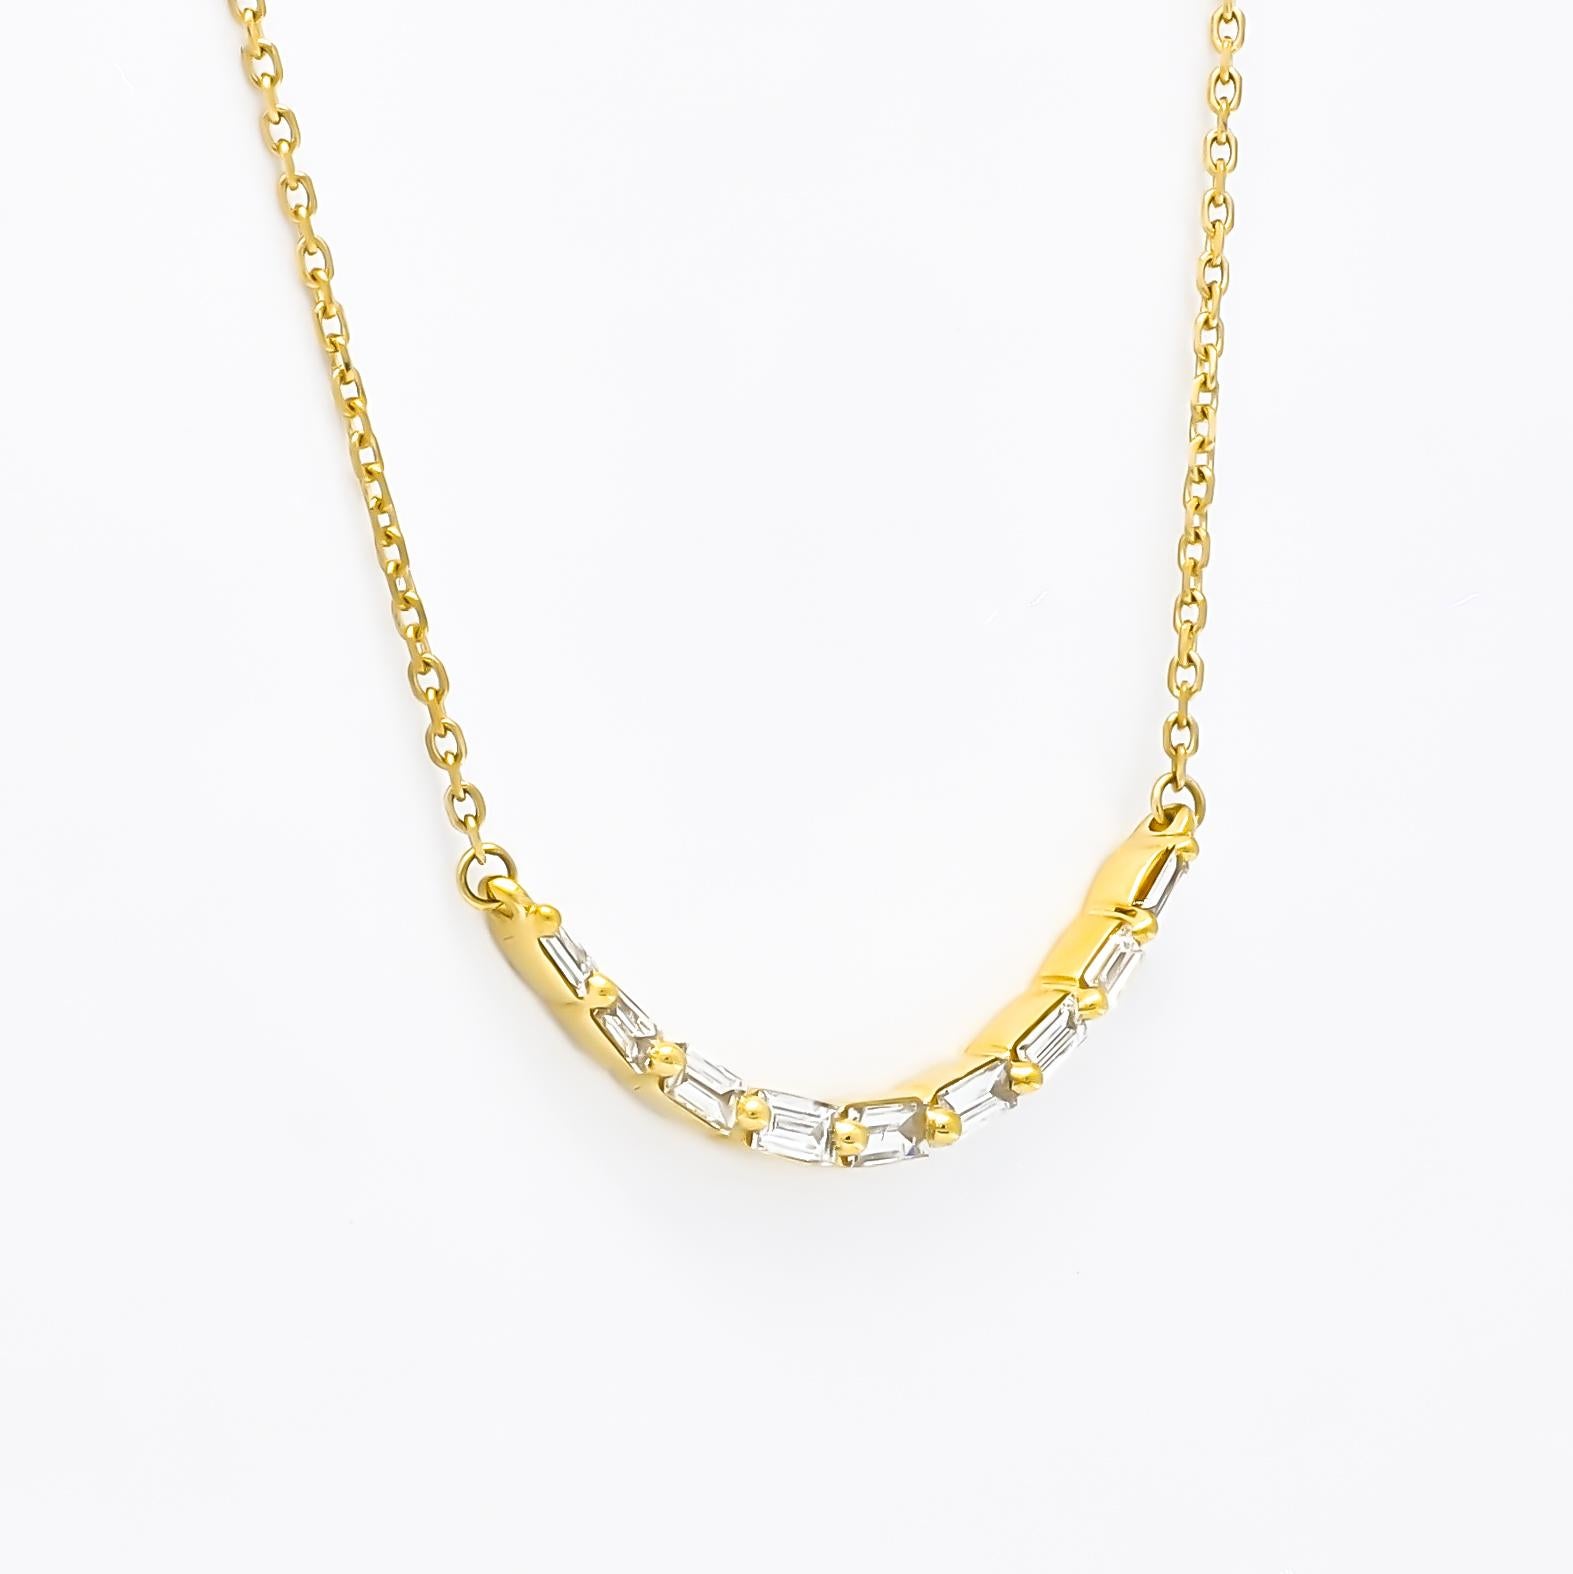 This breathtaking curved bar pendant necklace is a true masterpiece, featuring a single line of horizontally set baguette diamonds that create a dramatic and dazzling effect. 

The pendant is crafted in luxurious 18 yellow karat gold, providing a